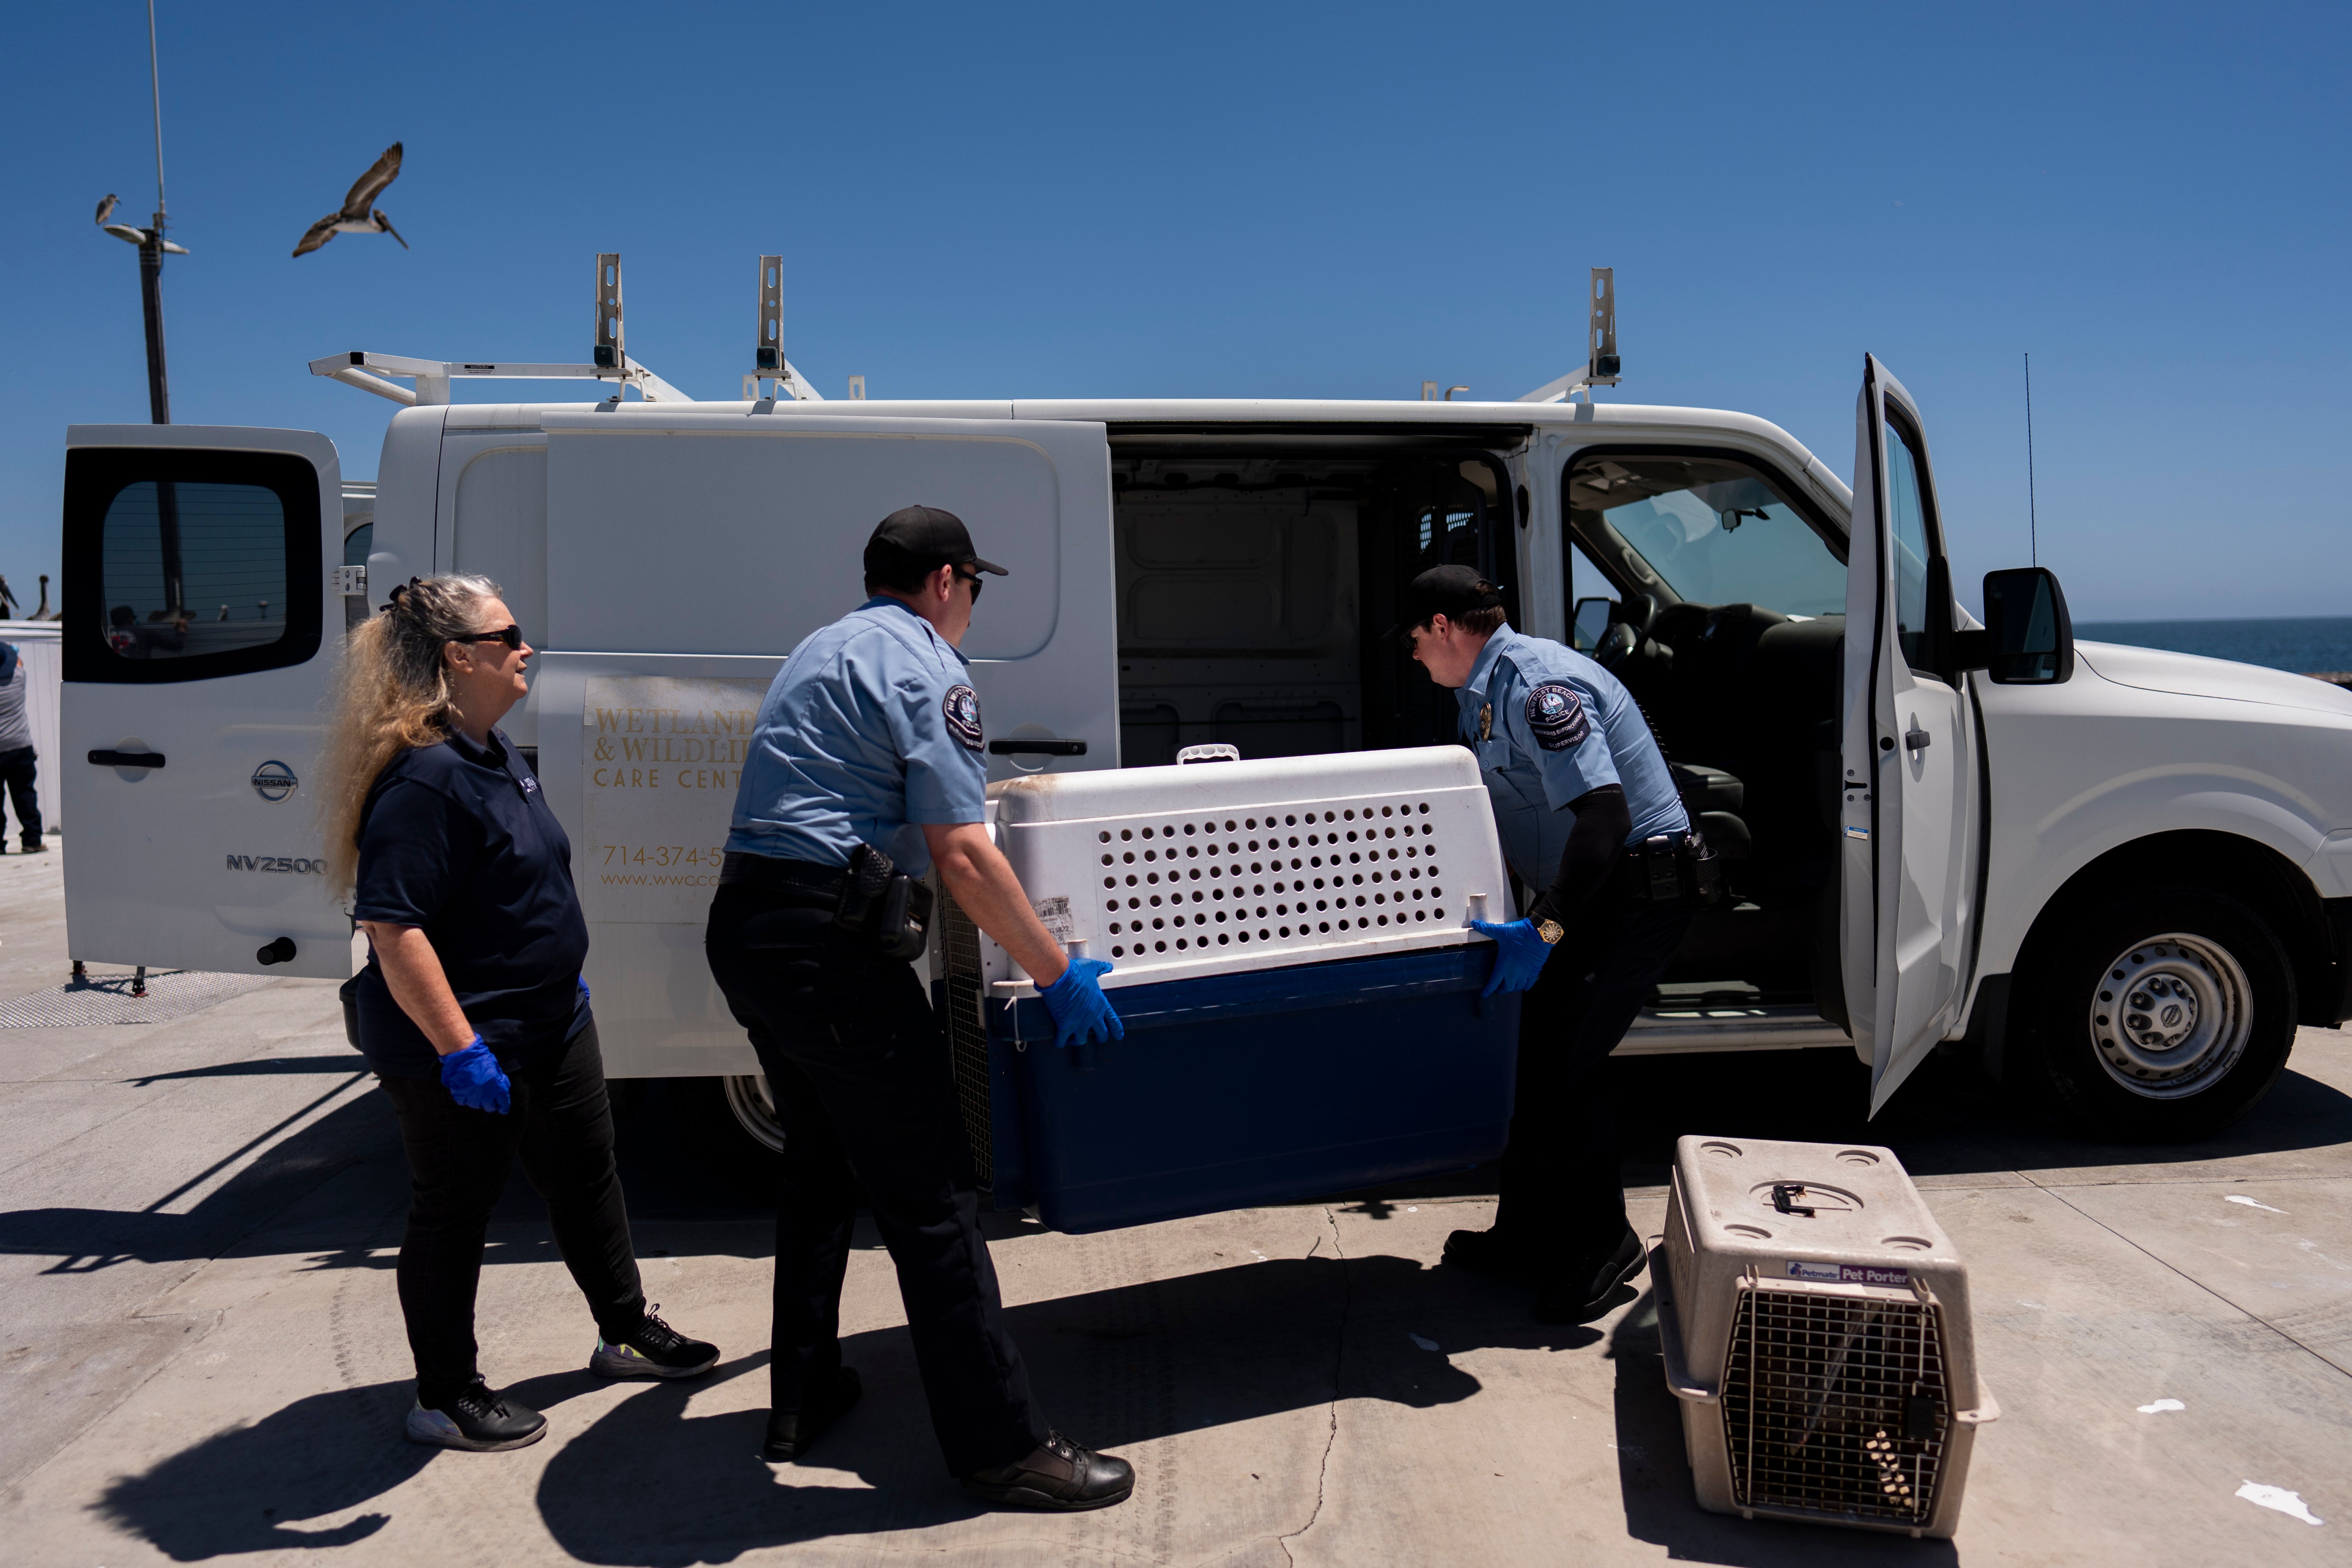 Debbie McGuire, left, of the Wetlands and Wildlife Care Center, watches as Newport Beach police officers load cages carrying sick pelicans into a van for treatment